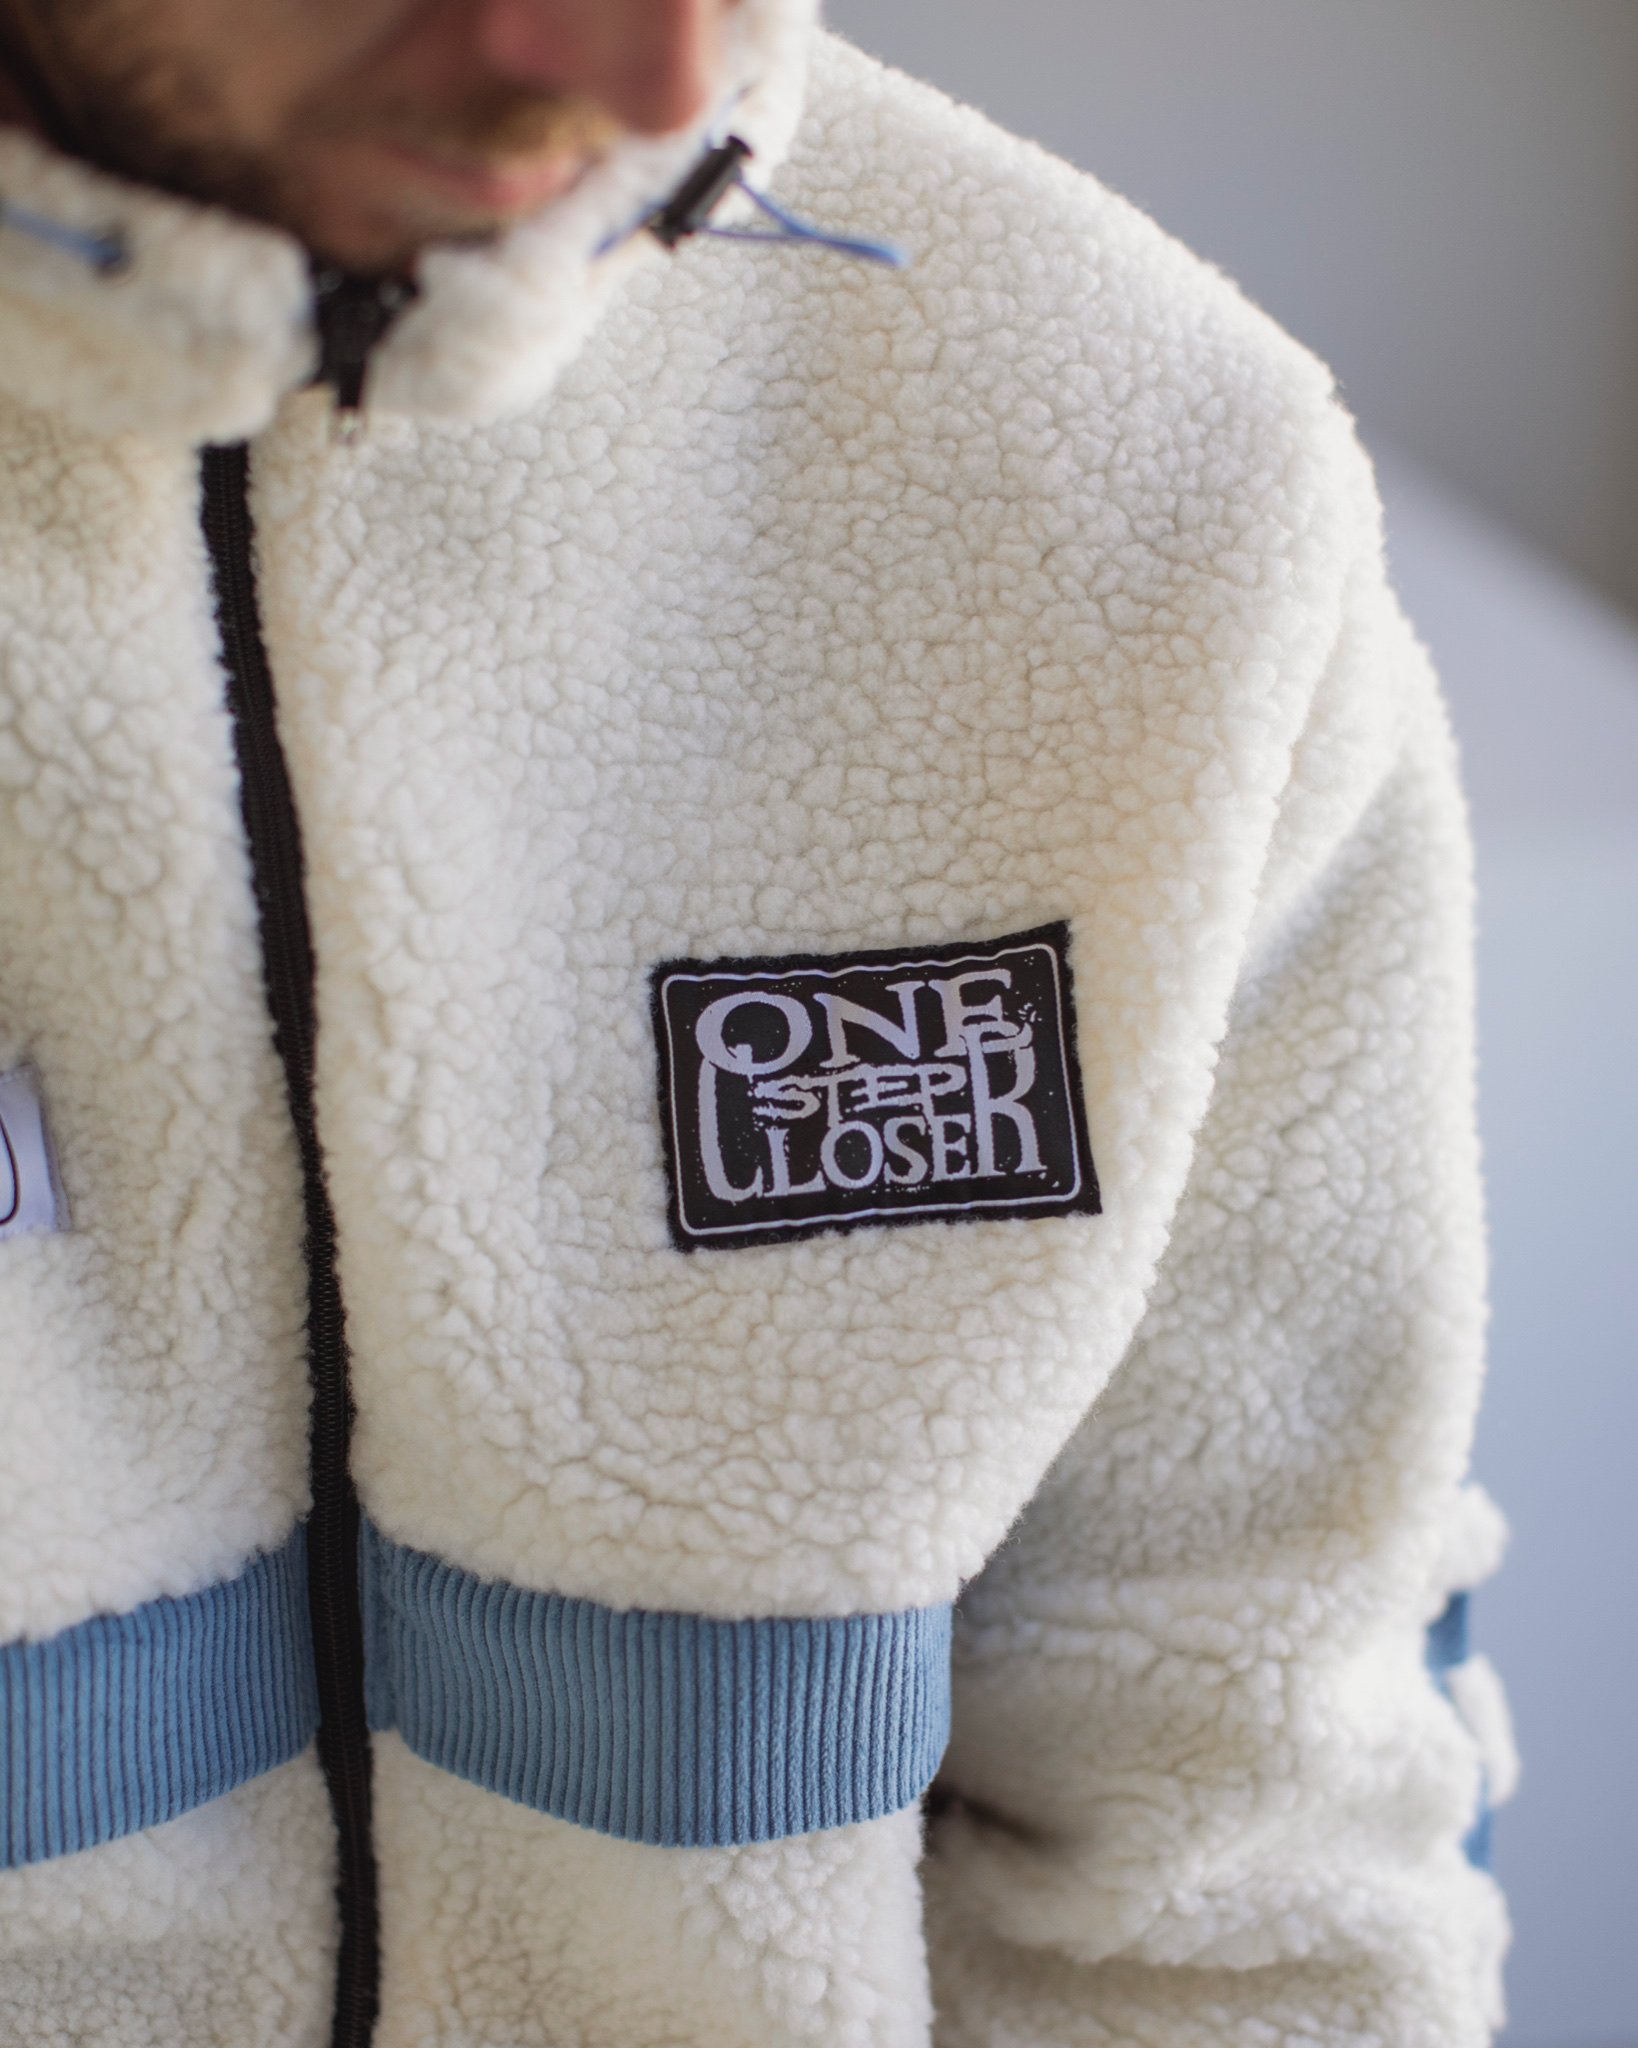 Custom Sherpa Jacket | Woven Patches | Thick Fleece Material | One Step Closer